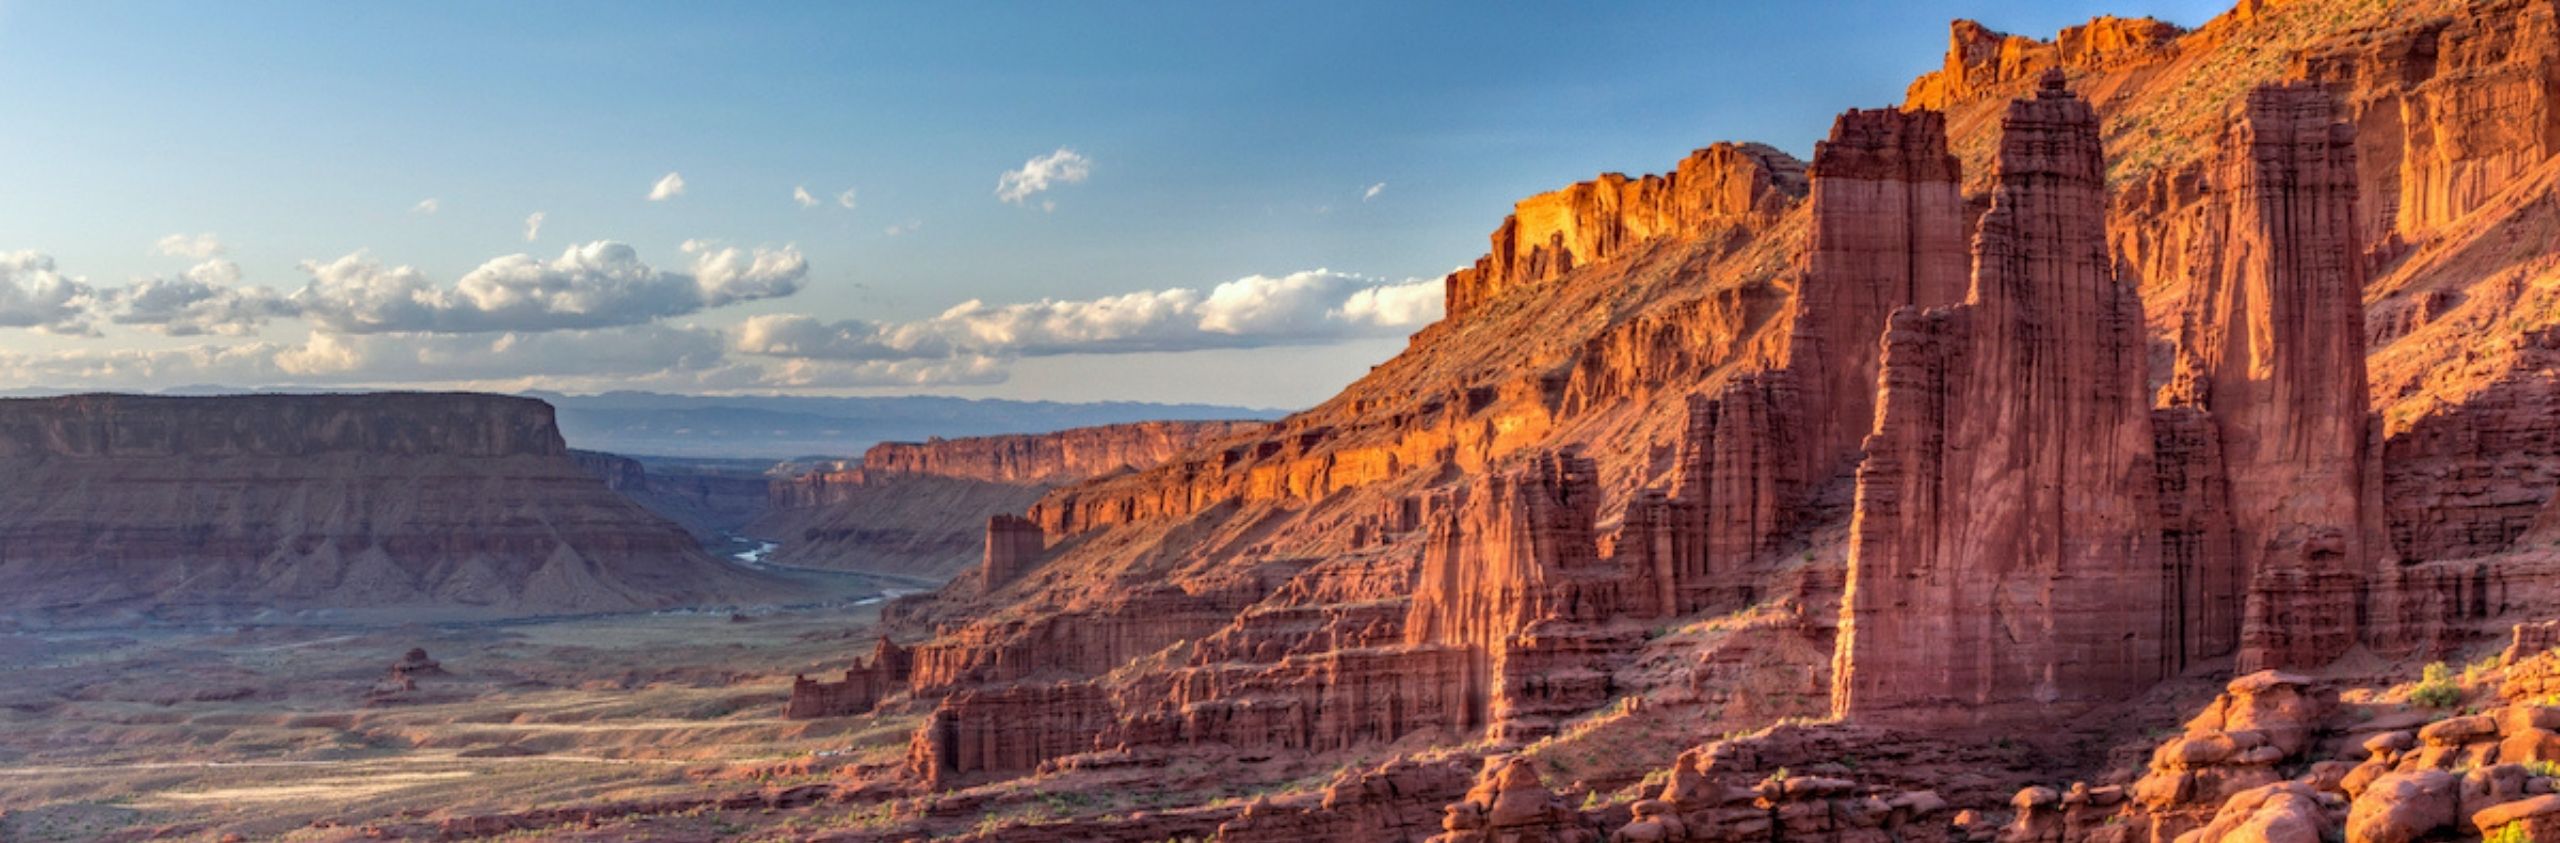 glowing light on vertical red cliffs and columns